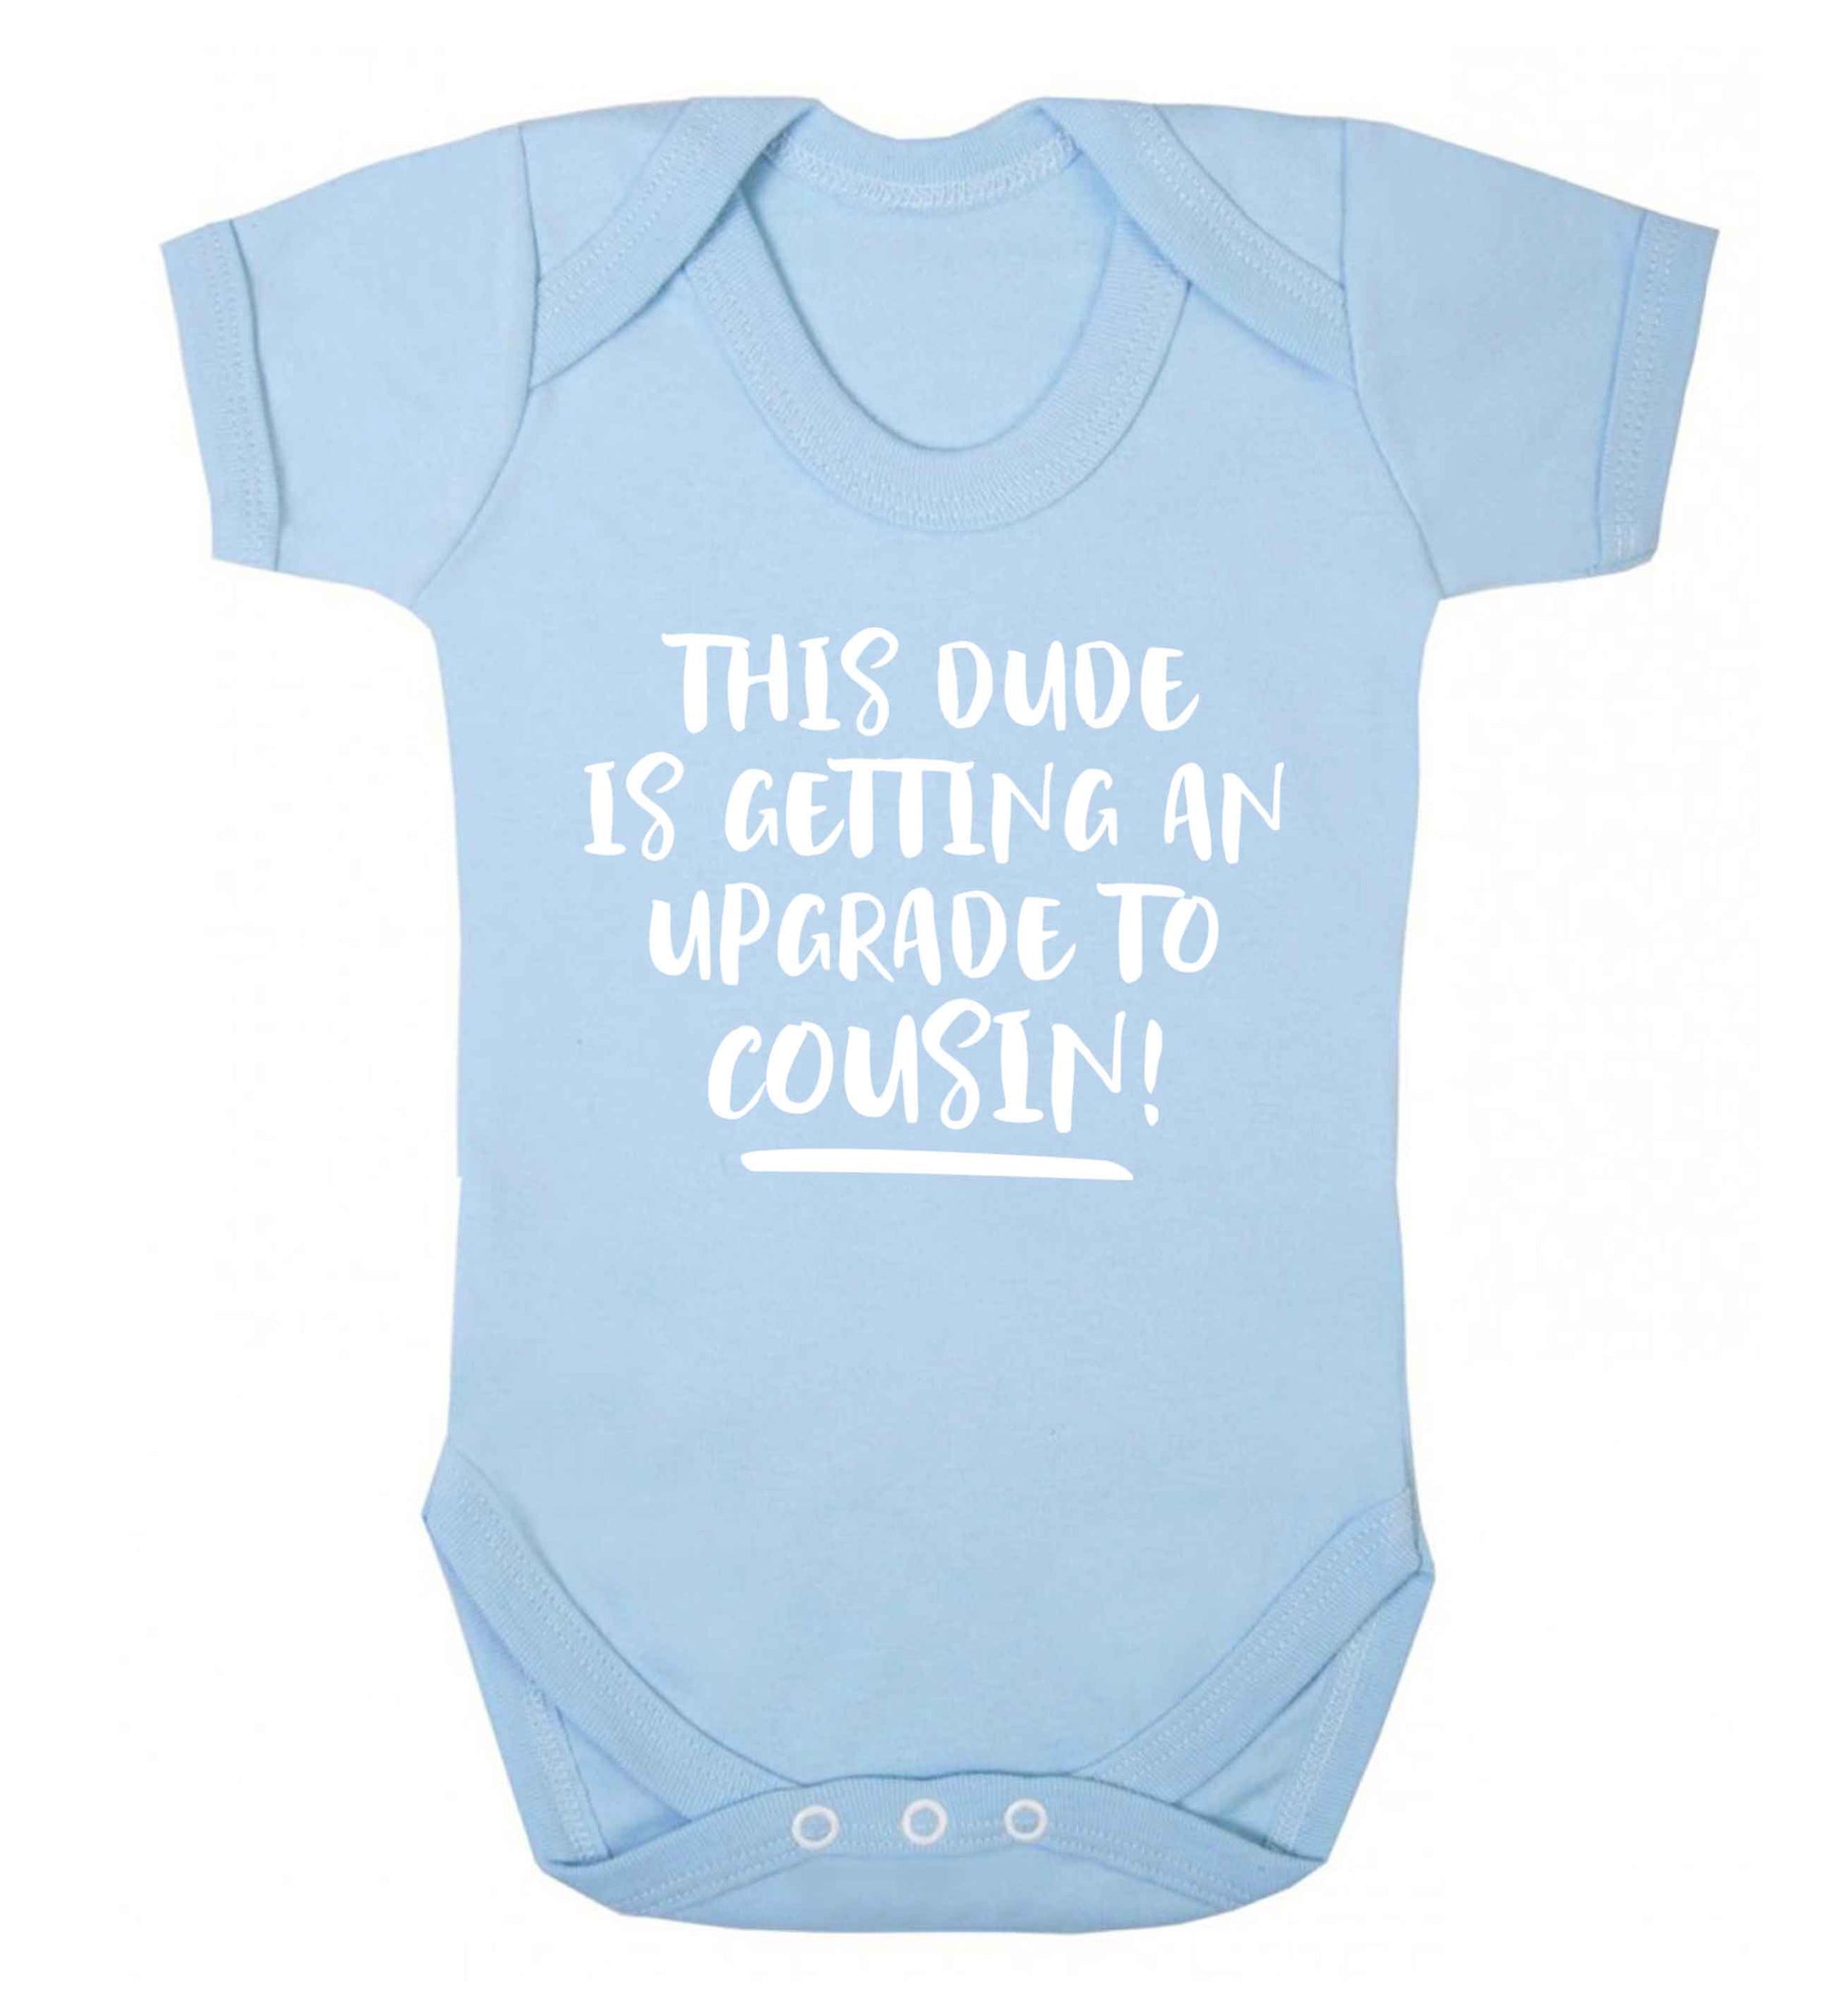 This dude is getting an upgrade to cousin! Baby Vest pale blue 18-24 months